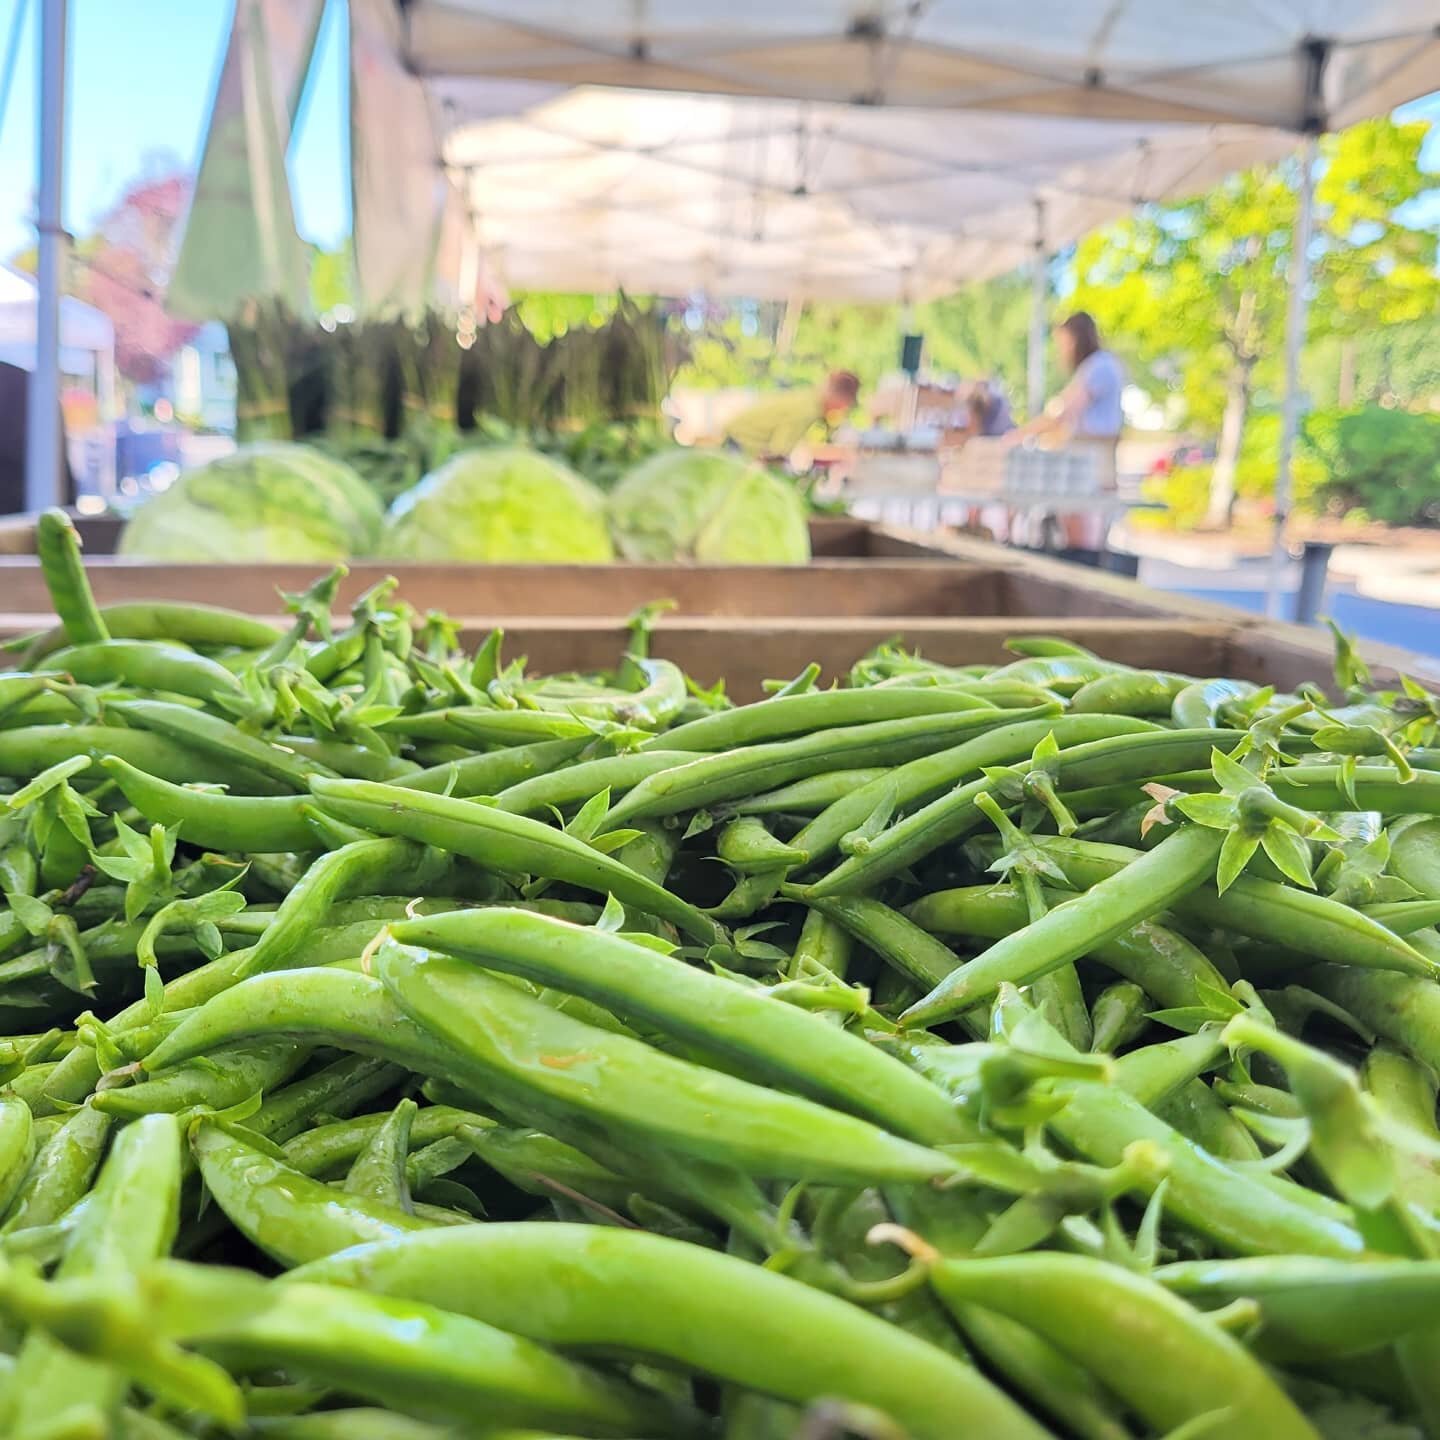 Summer peas and beans are here! Stop by the market today to pick some up: 

Saturday:
@portlandfarmers 8:30 to 2:00pm
@beavertonmarket from 9:00 to 1:30pm
Sunday:
@woodstockmarketpdx from 10:00 to 2:00pm! 
At King market 10:00 to 2:00pm! 

&nbsp;#sug